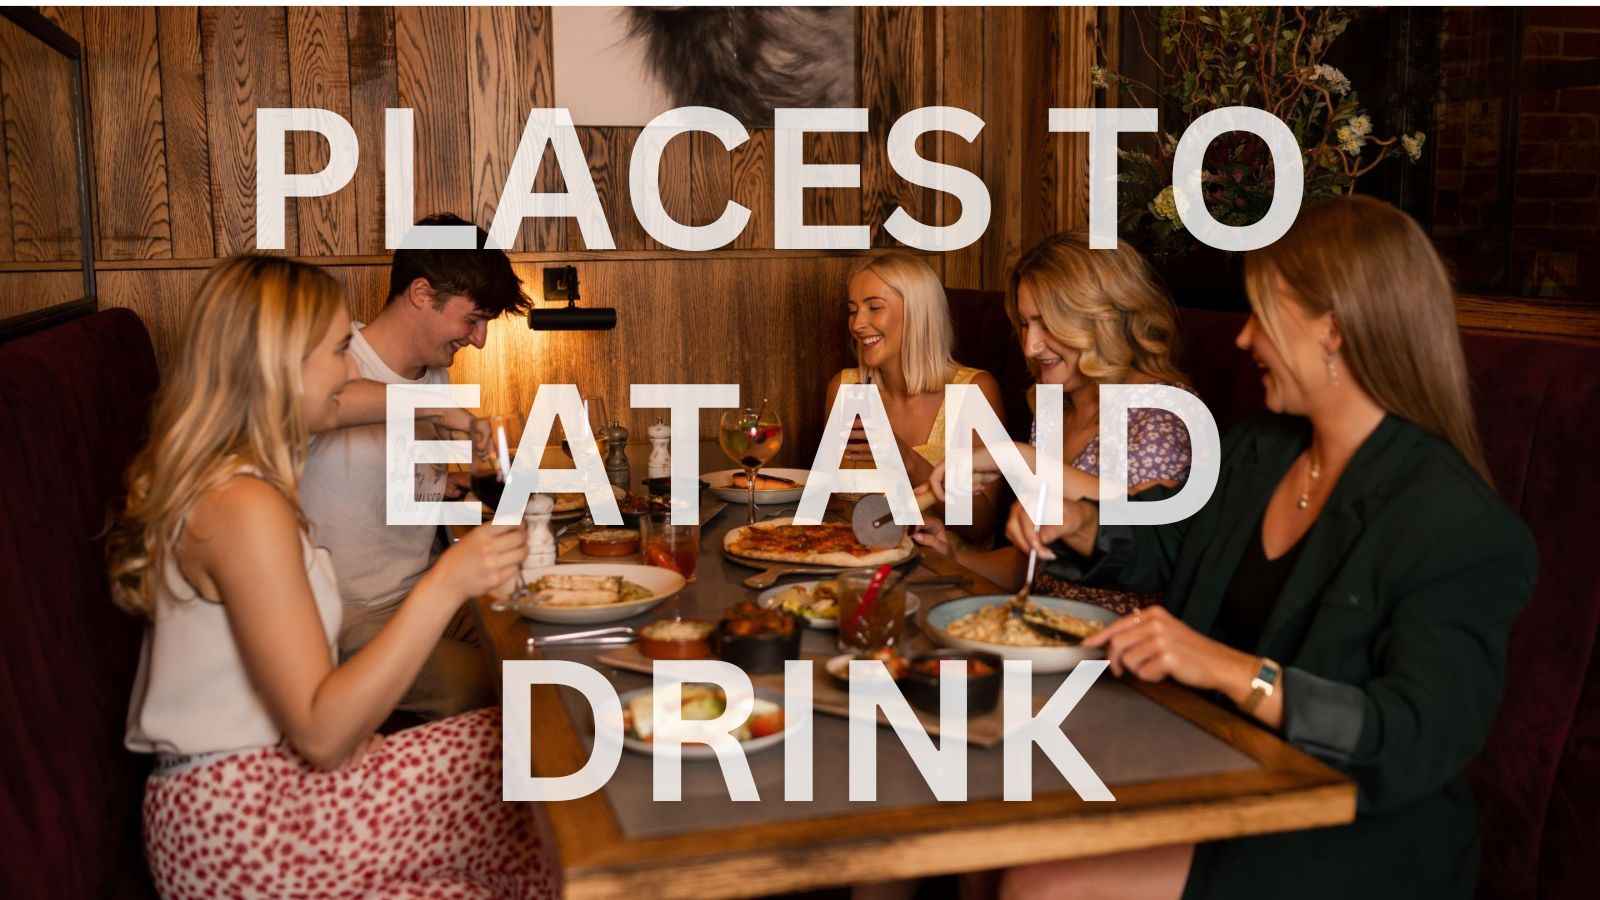 places-to-eat-and-drink---website-format.jpg